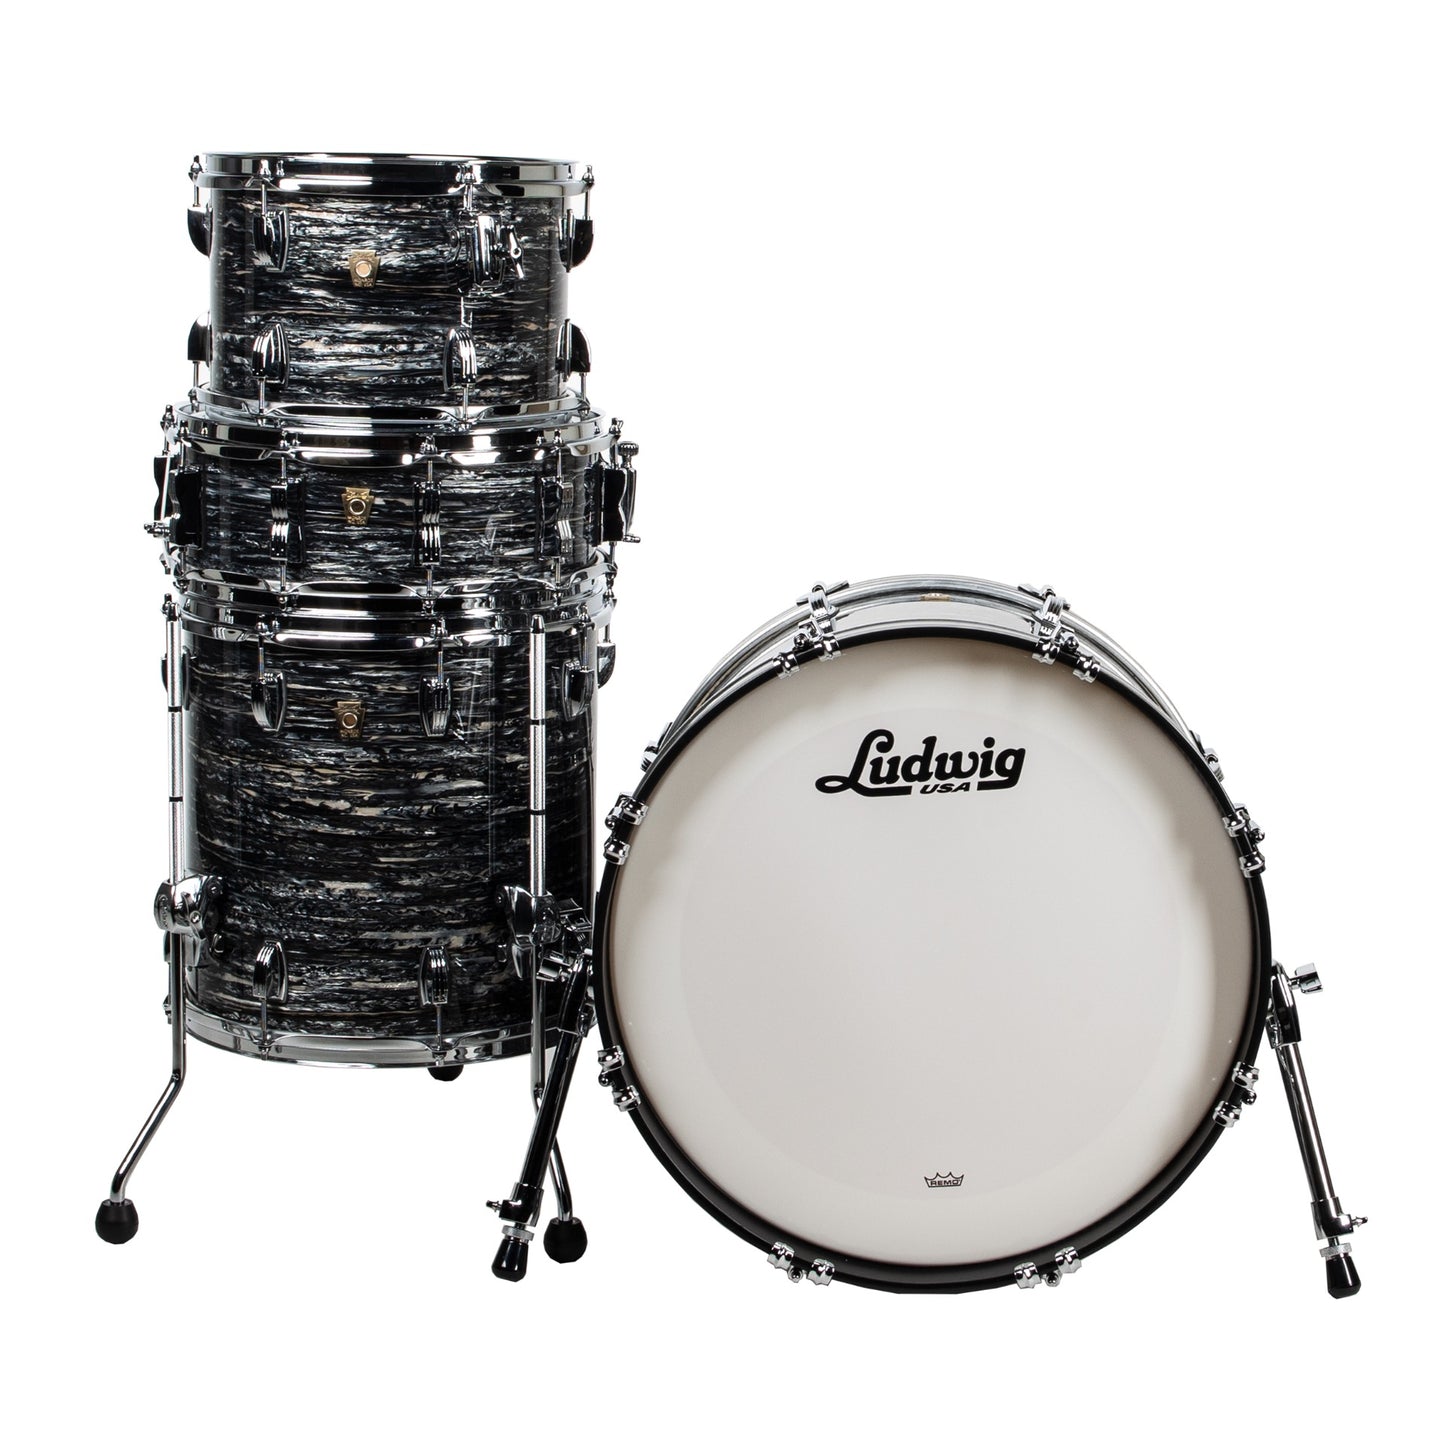 Ludwig Classic Maple 4-Piece Downbeat Drum Kit - Vintage Black Oyster